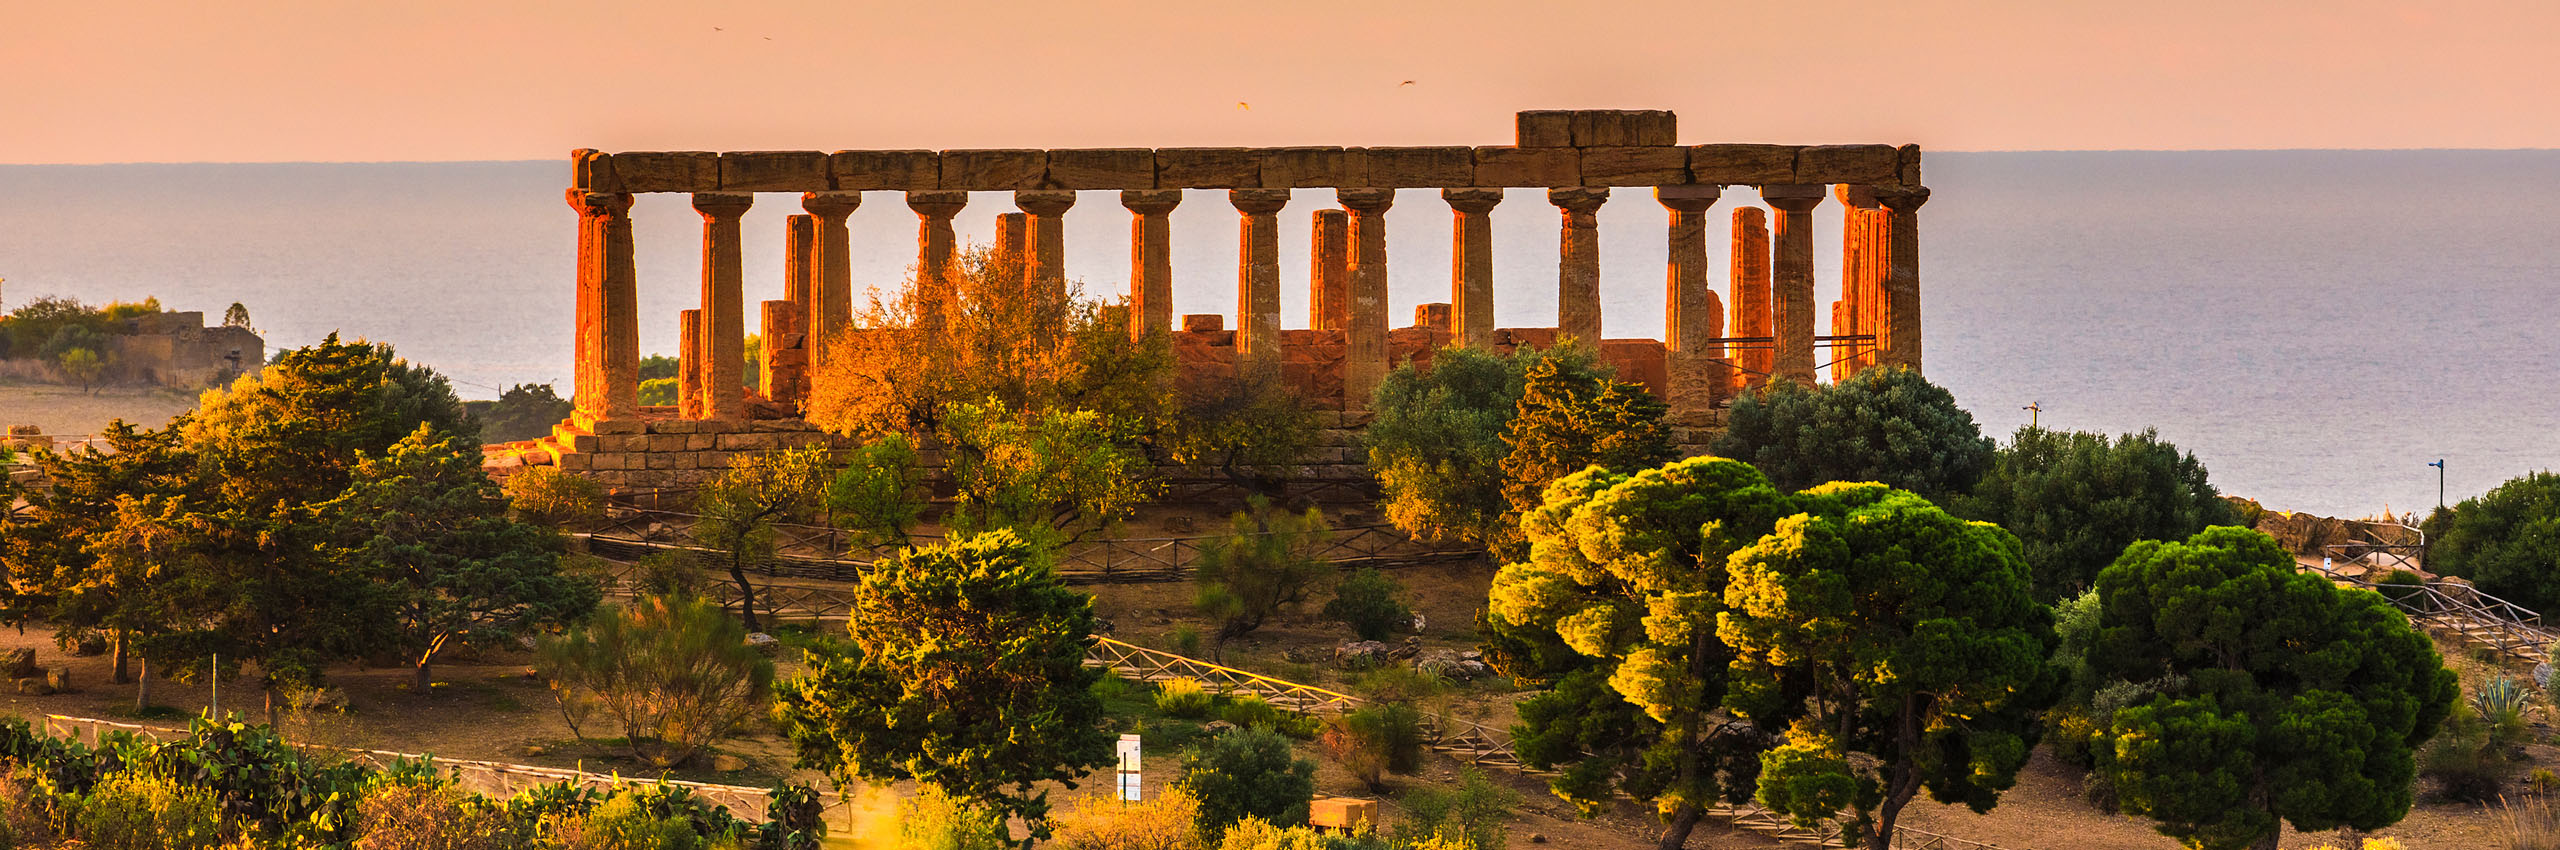 41098098 | Italy/Sicily, Agrigento district, Agrigento, Valley of the Temples | © Alessandro Saffo/HUBER IMAGES